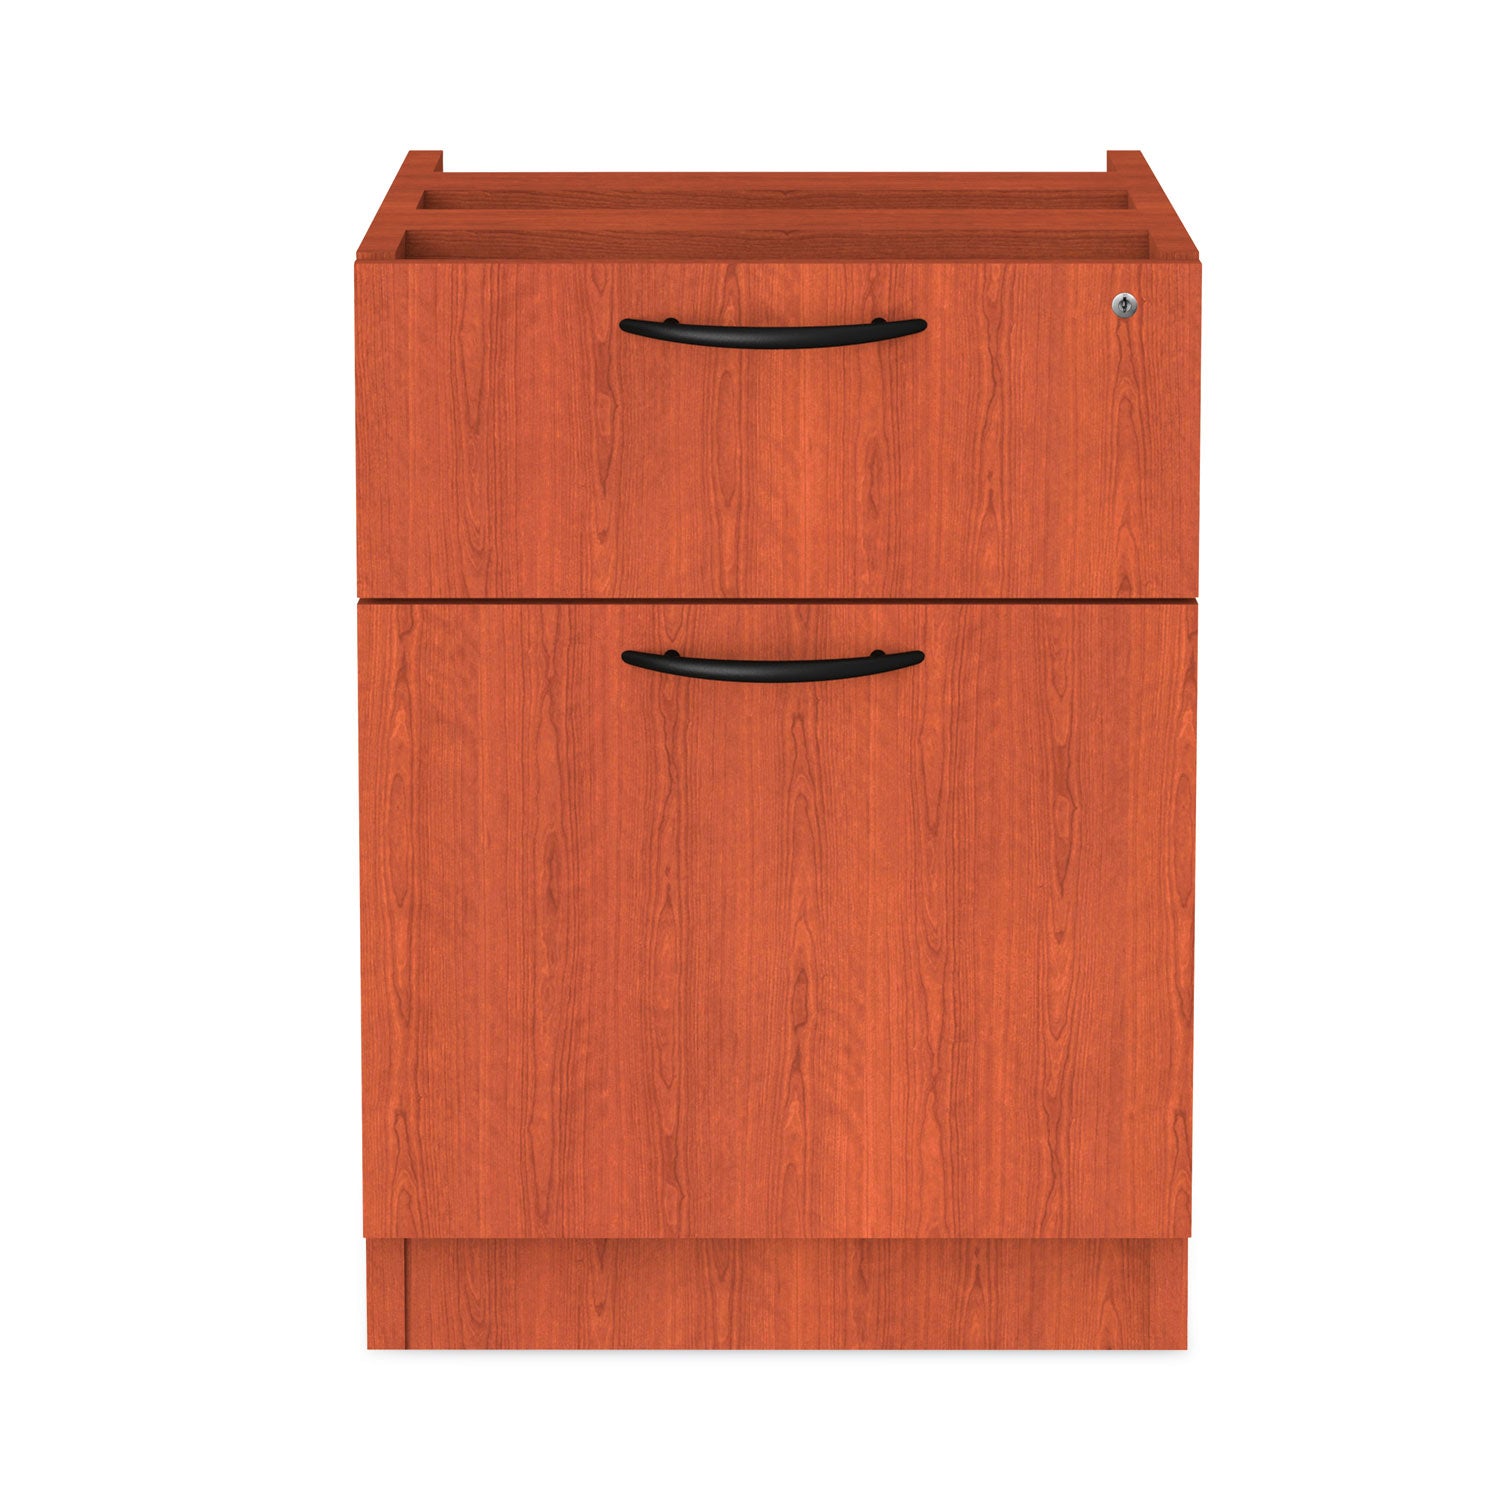 Alera Valencia Series Hanging Pedestal File, Left/Right, 2-Drawer: Box/File, Legal/Letter, Cherry, 15.63 x 20.5 x 19.25 - 